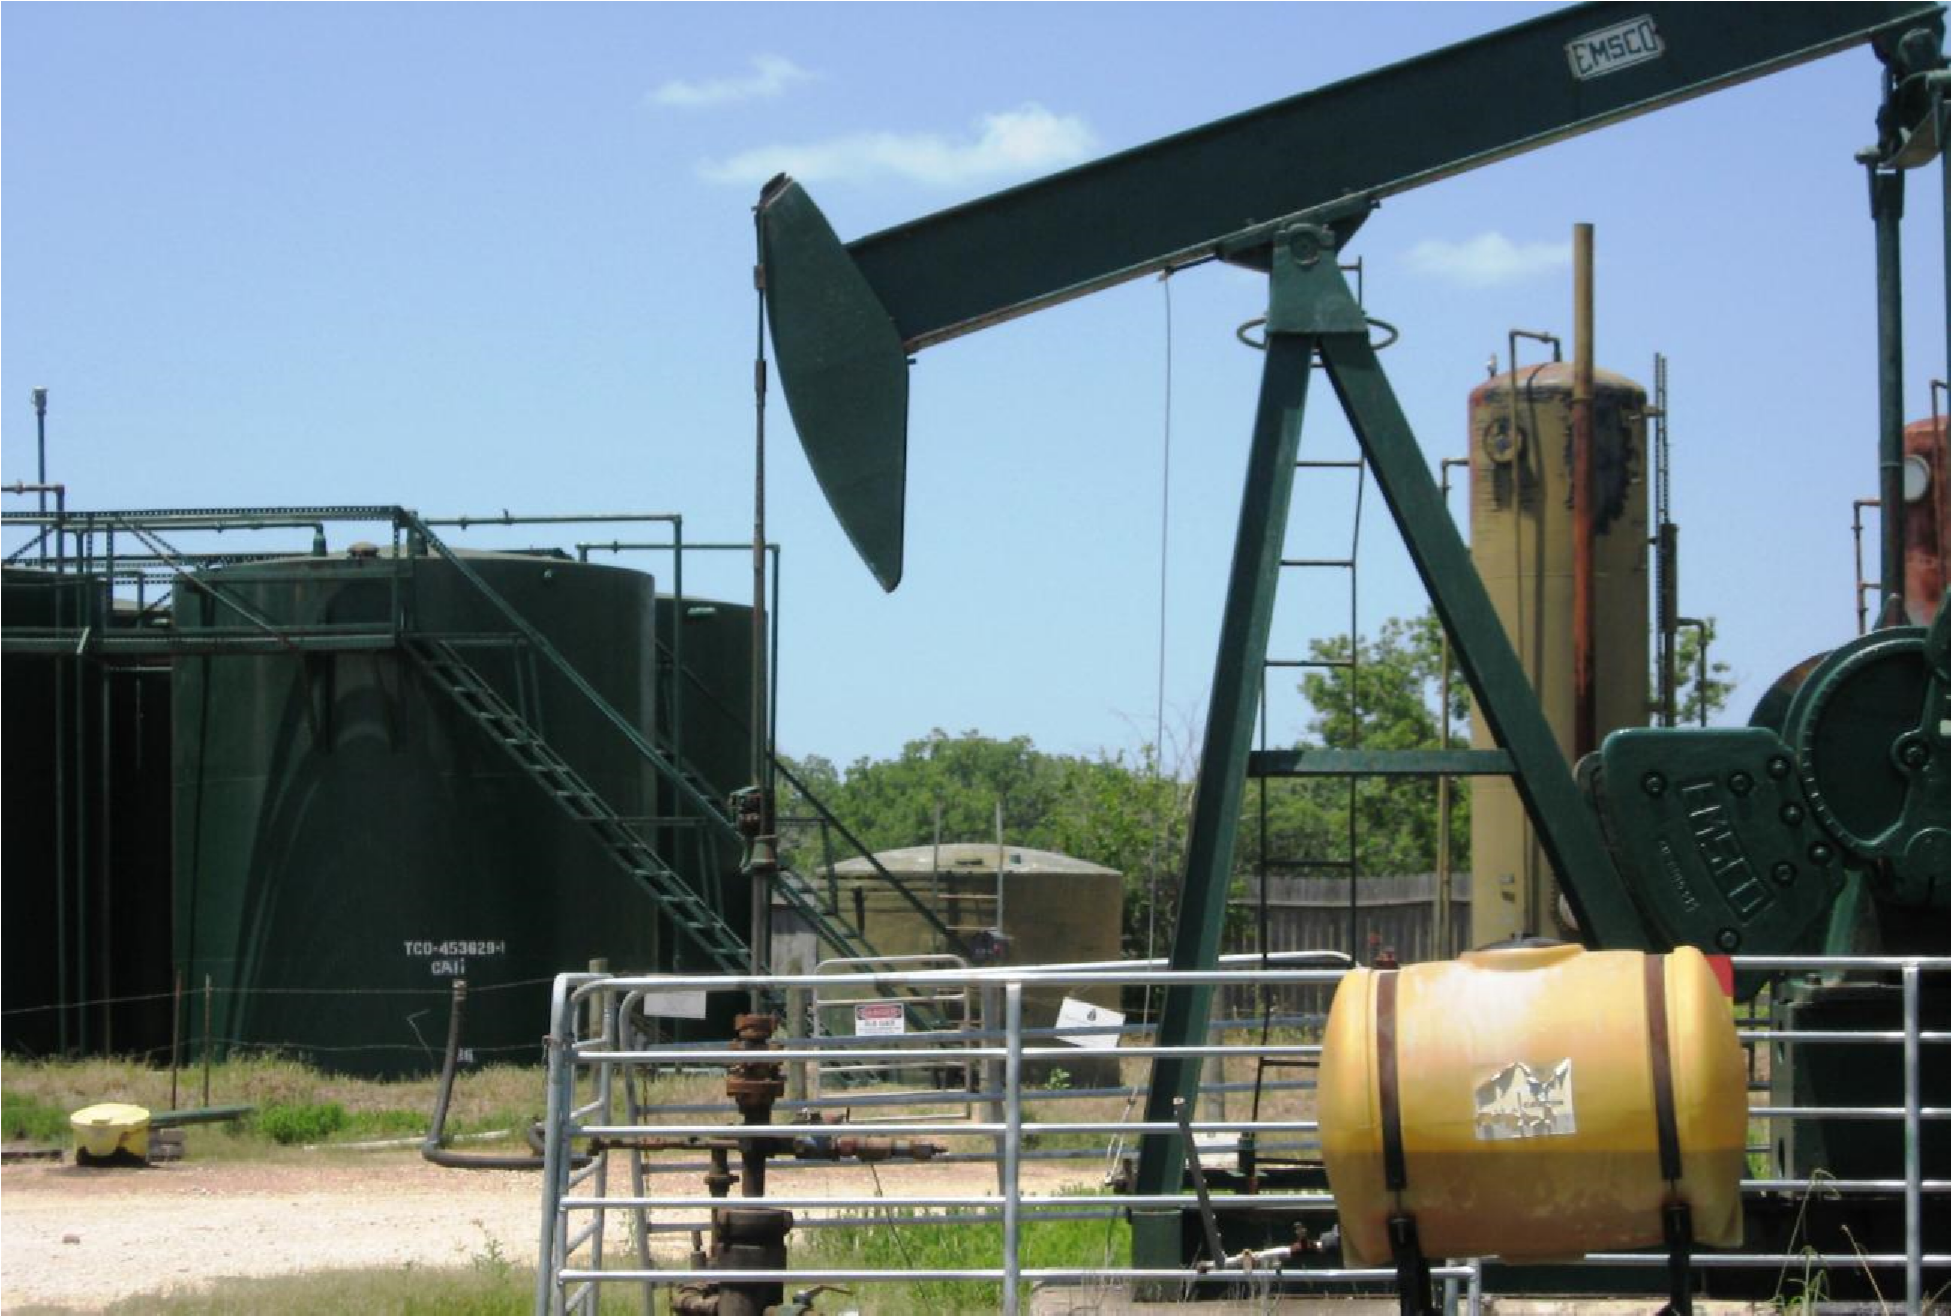 Texas Oil & Gas at the Brookshire Salt Dome